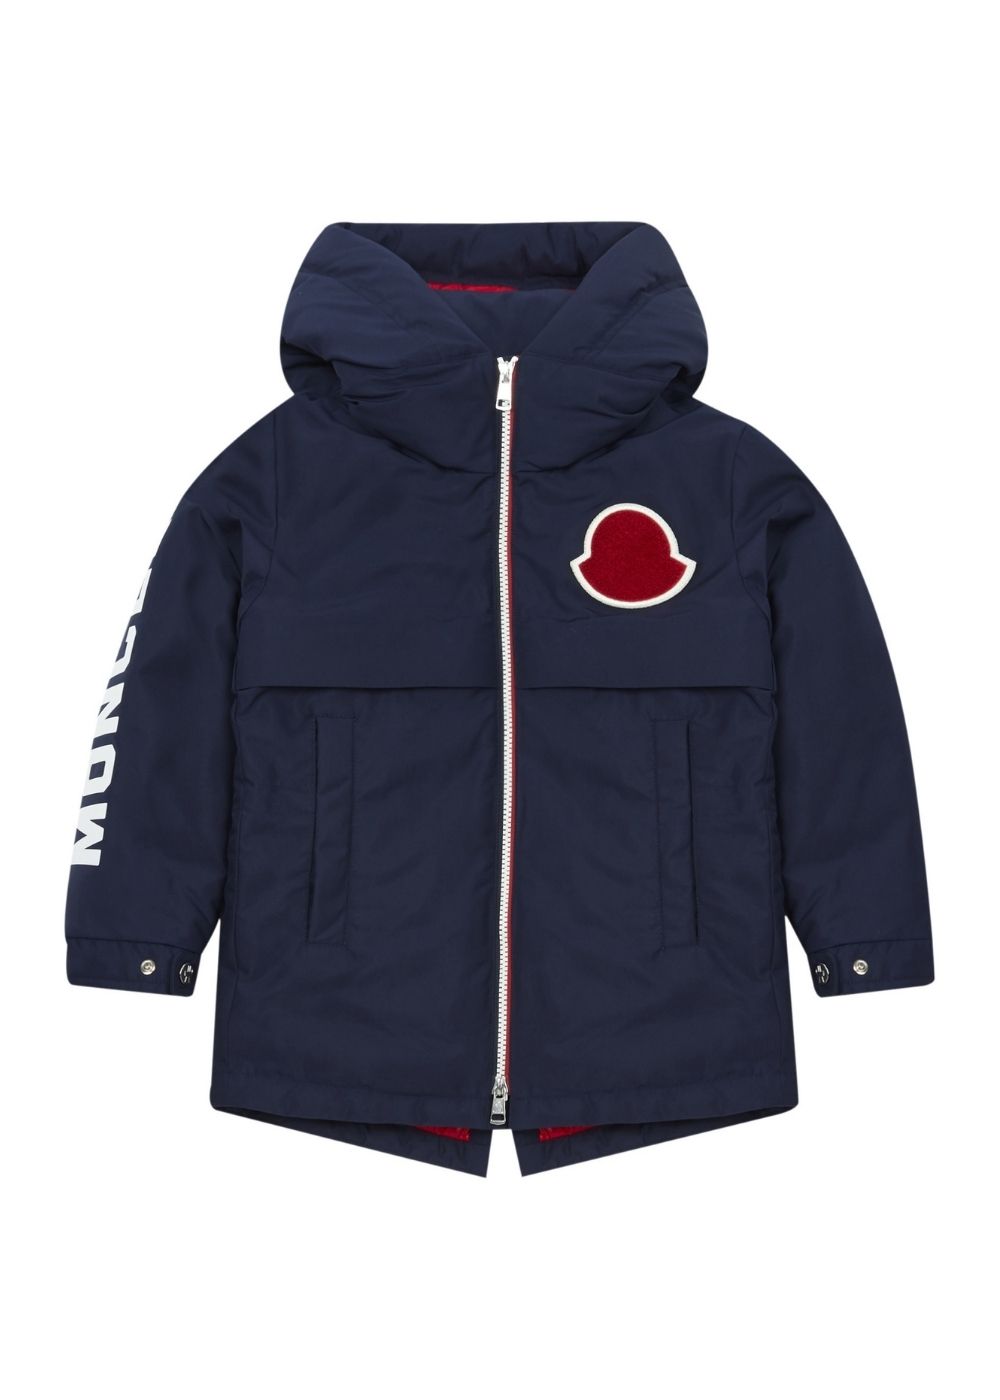 Featured image for “MONCLER AIRON”